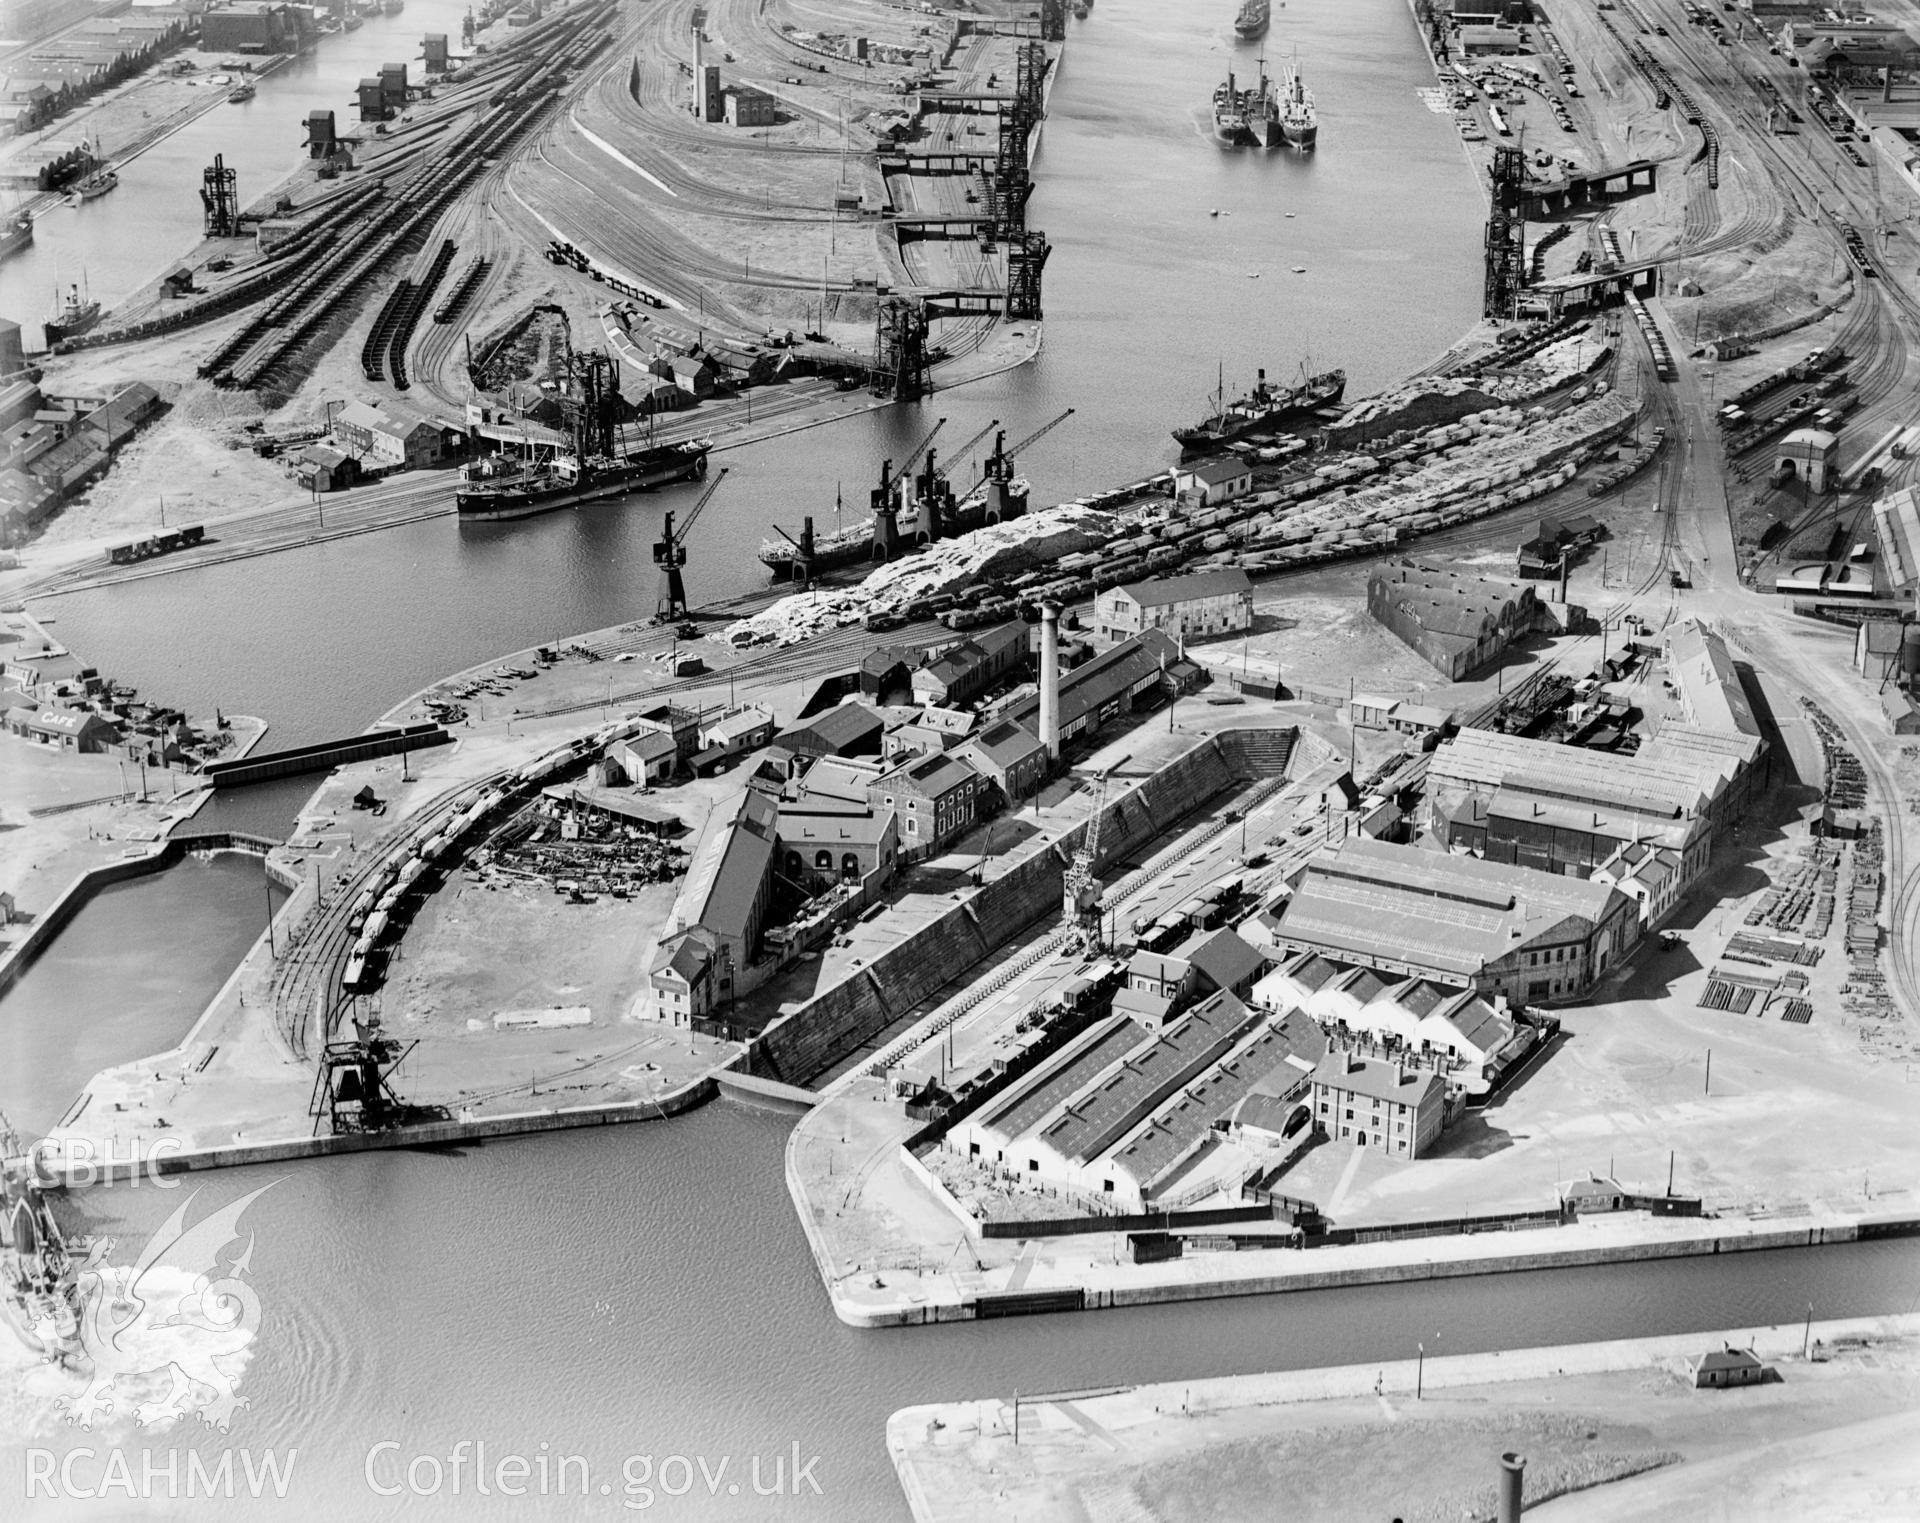 View of C.H. Bailey Ltd., dry dock owners & ship repairers and surrounding dockyard, Cardiff, oblique aerial view. 5?x4? black and white glass plate negative.